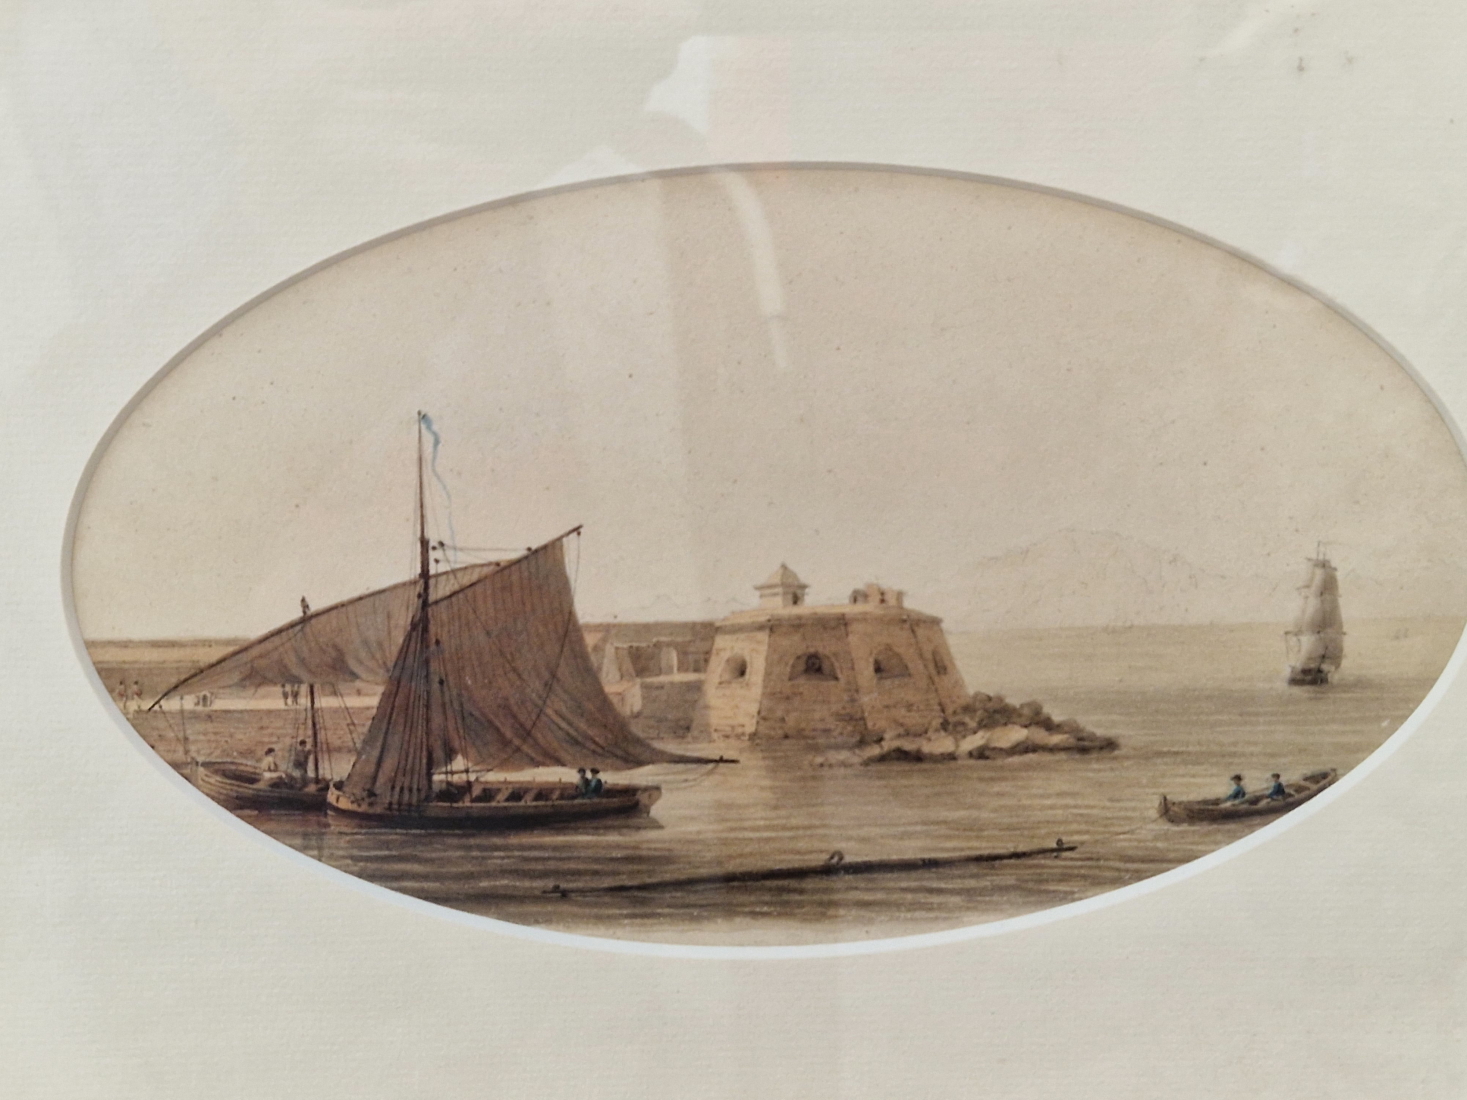 WILLIAM JAMES BENNETT 1787 - 1844, THE NEW MOLE - GIBRALTAR,, A WATERCOLOUR OVAL 12 x 21cms TOGETHER